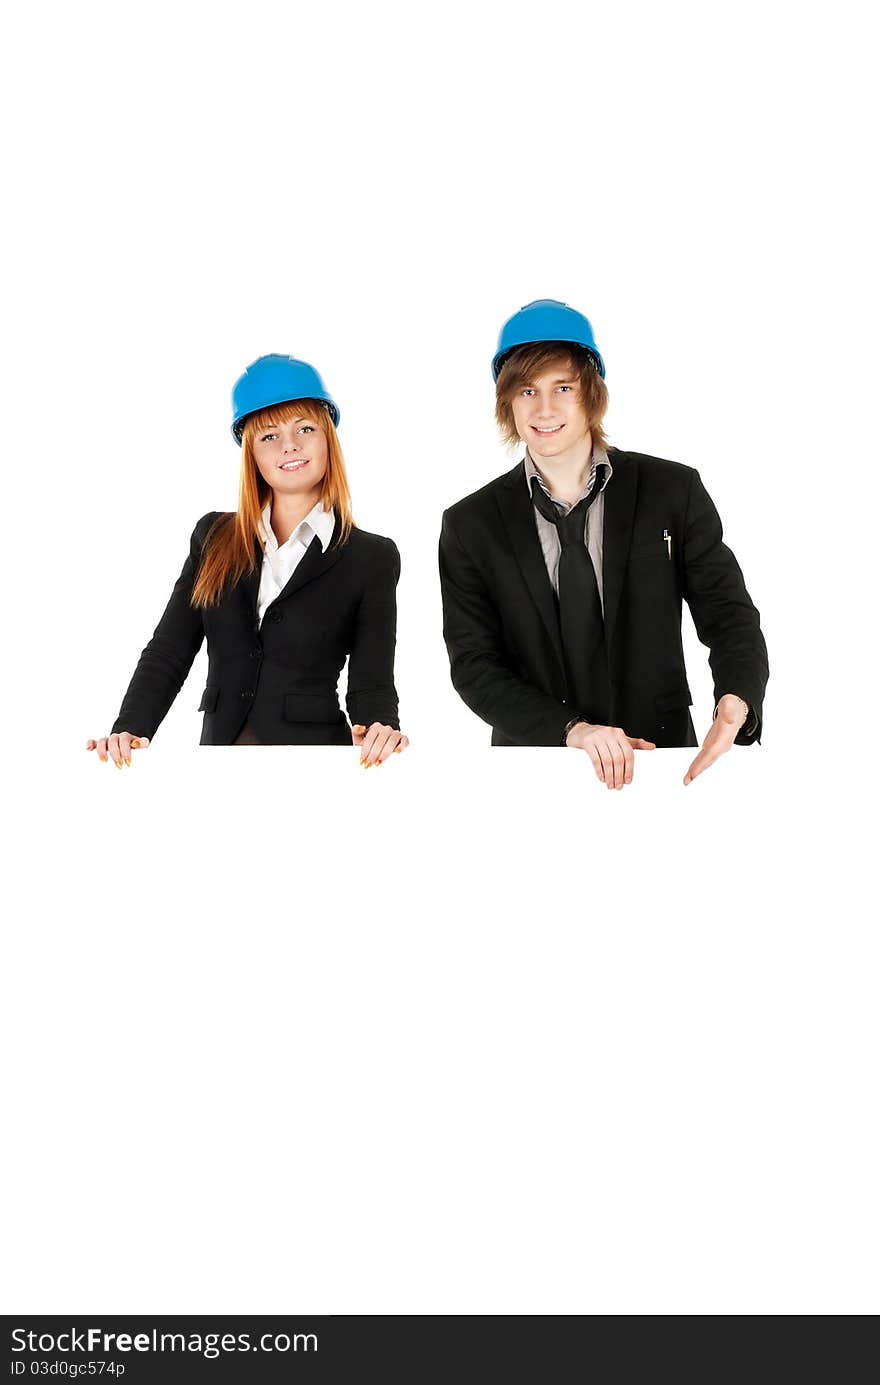 Business man and business woman holding board with helmets on over white background. Business man and business woman holding board with helmets on over white background